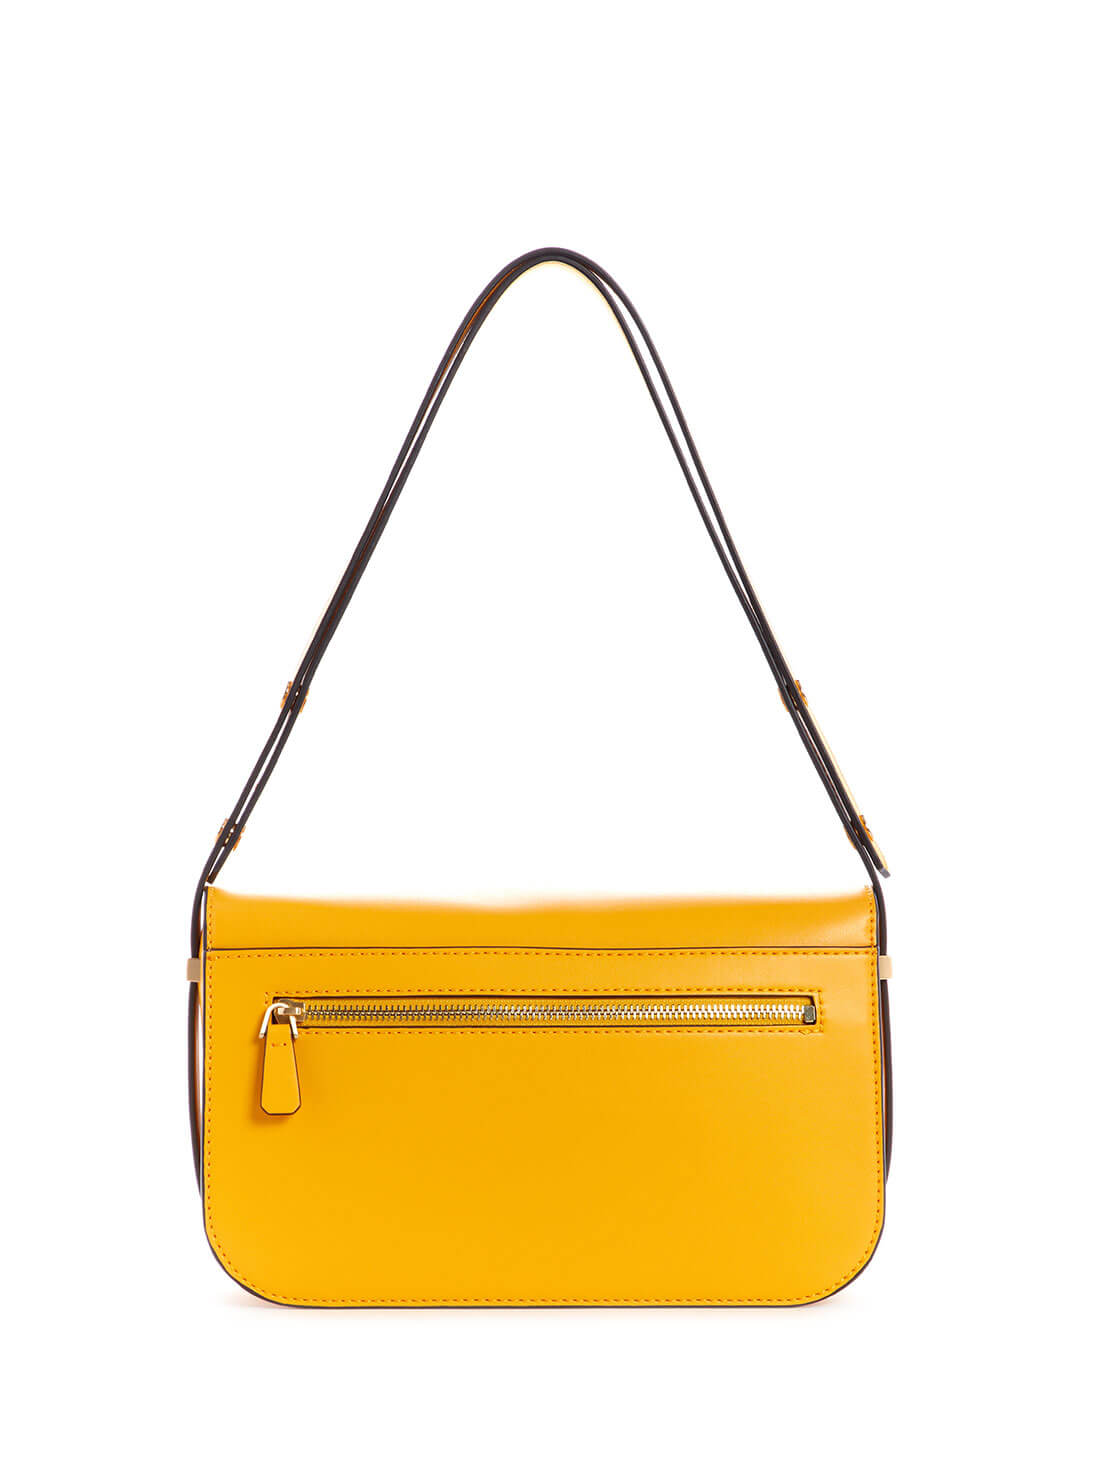 GUESS Womens Yellow Hensely Convertible Shoulder Bag VS811321 Back View